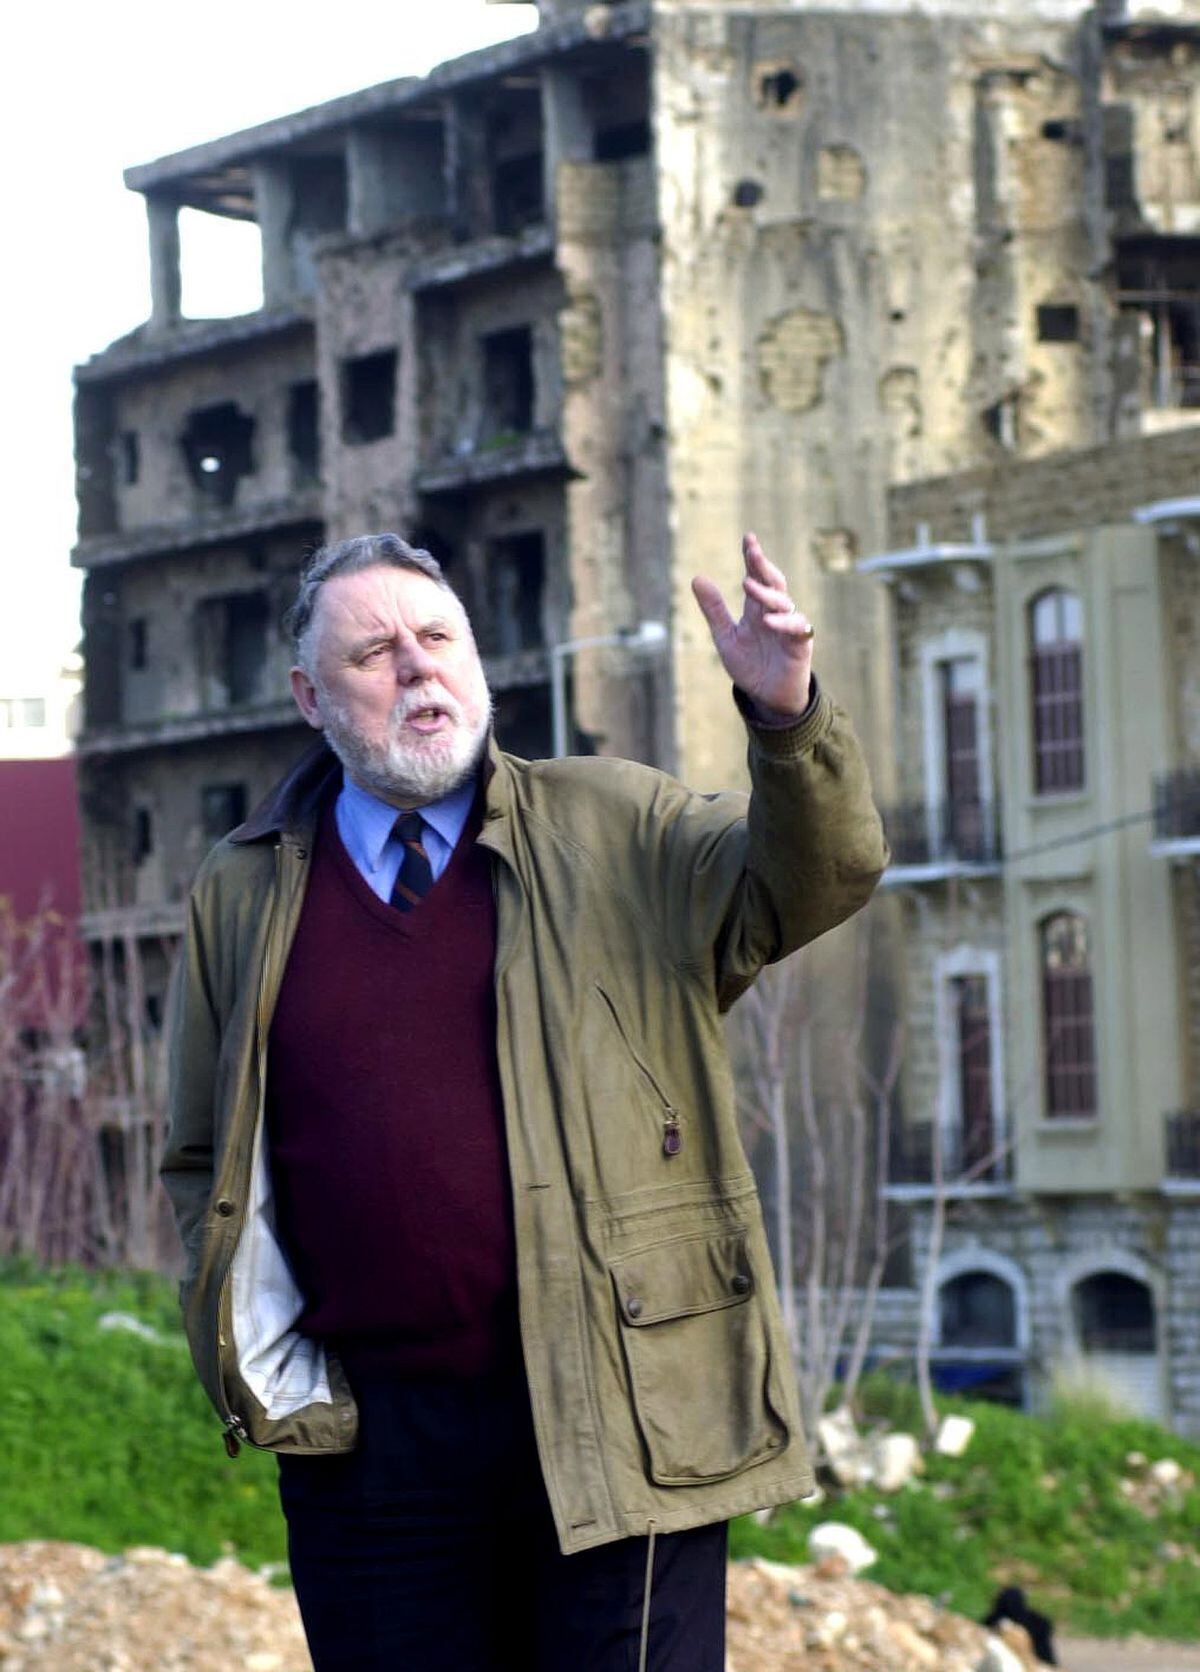 Former hostage Terry Waite returned to Beirut in 2004 for the first time since he was freed from years of captivity at the hands of Islamic militants. He is shown standing on the old Green Line between Beirut's east and west, divided during the country's civil war.